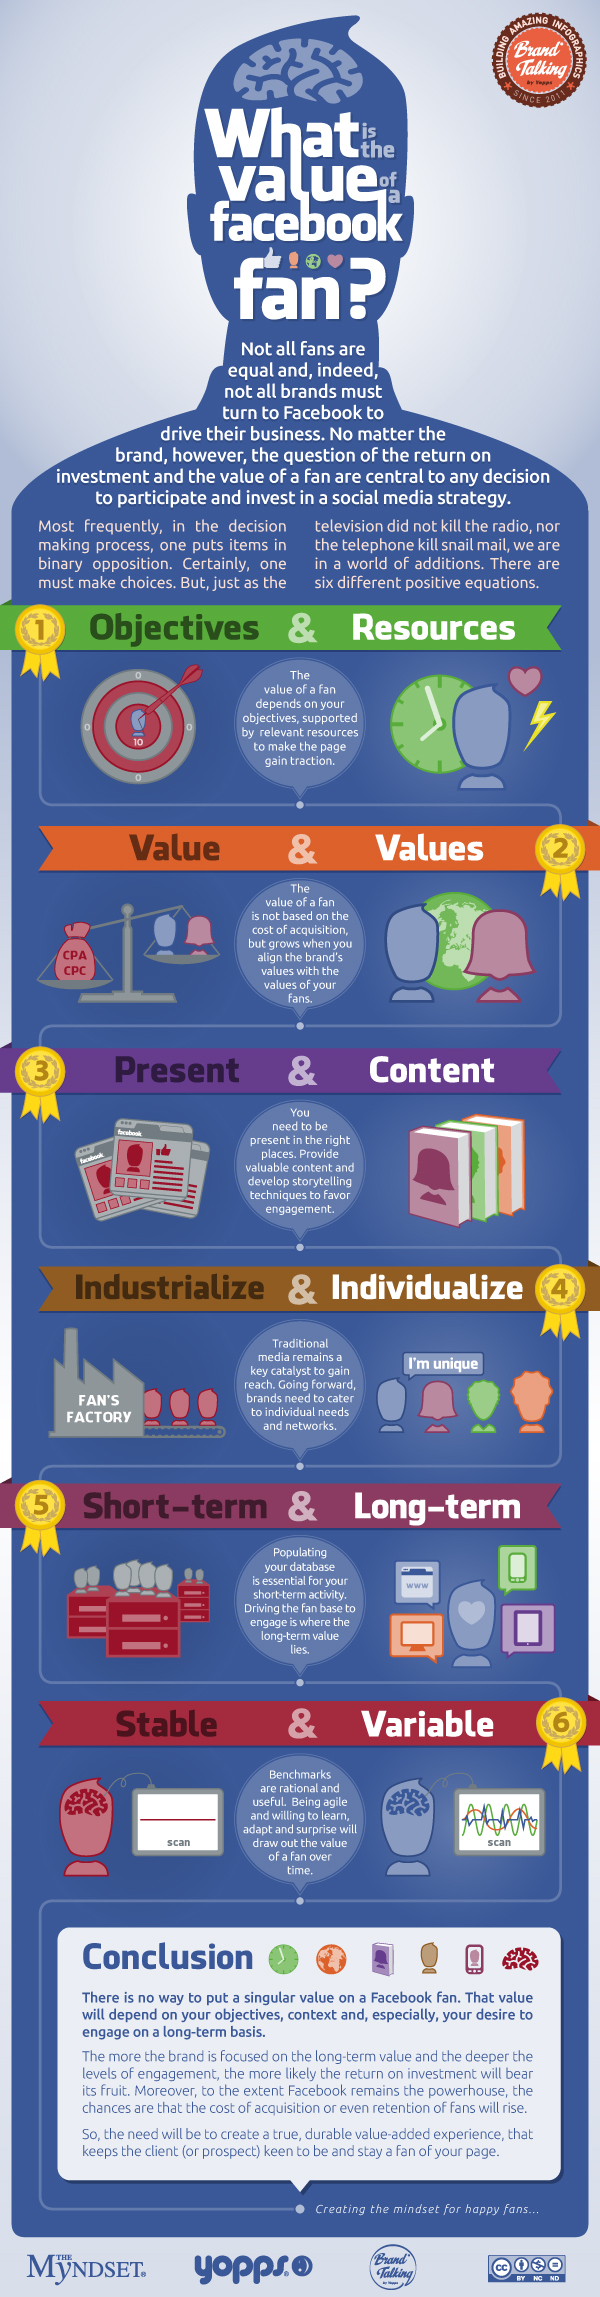 What-Is-The-Value-Of-A-Facebook-Fan-infographic